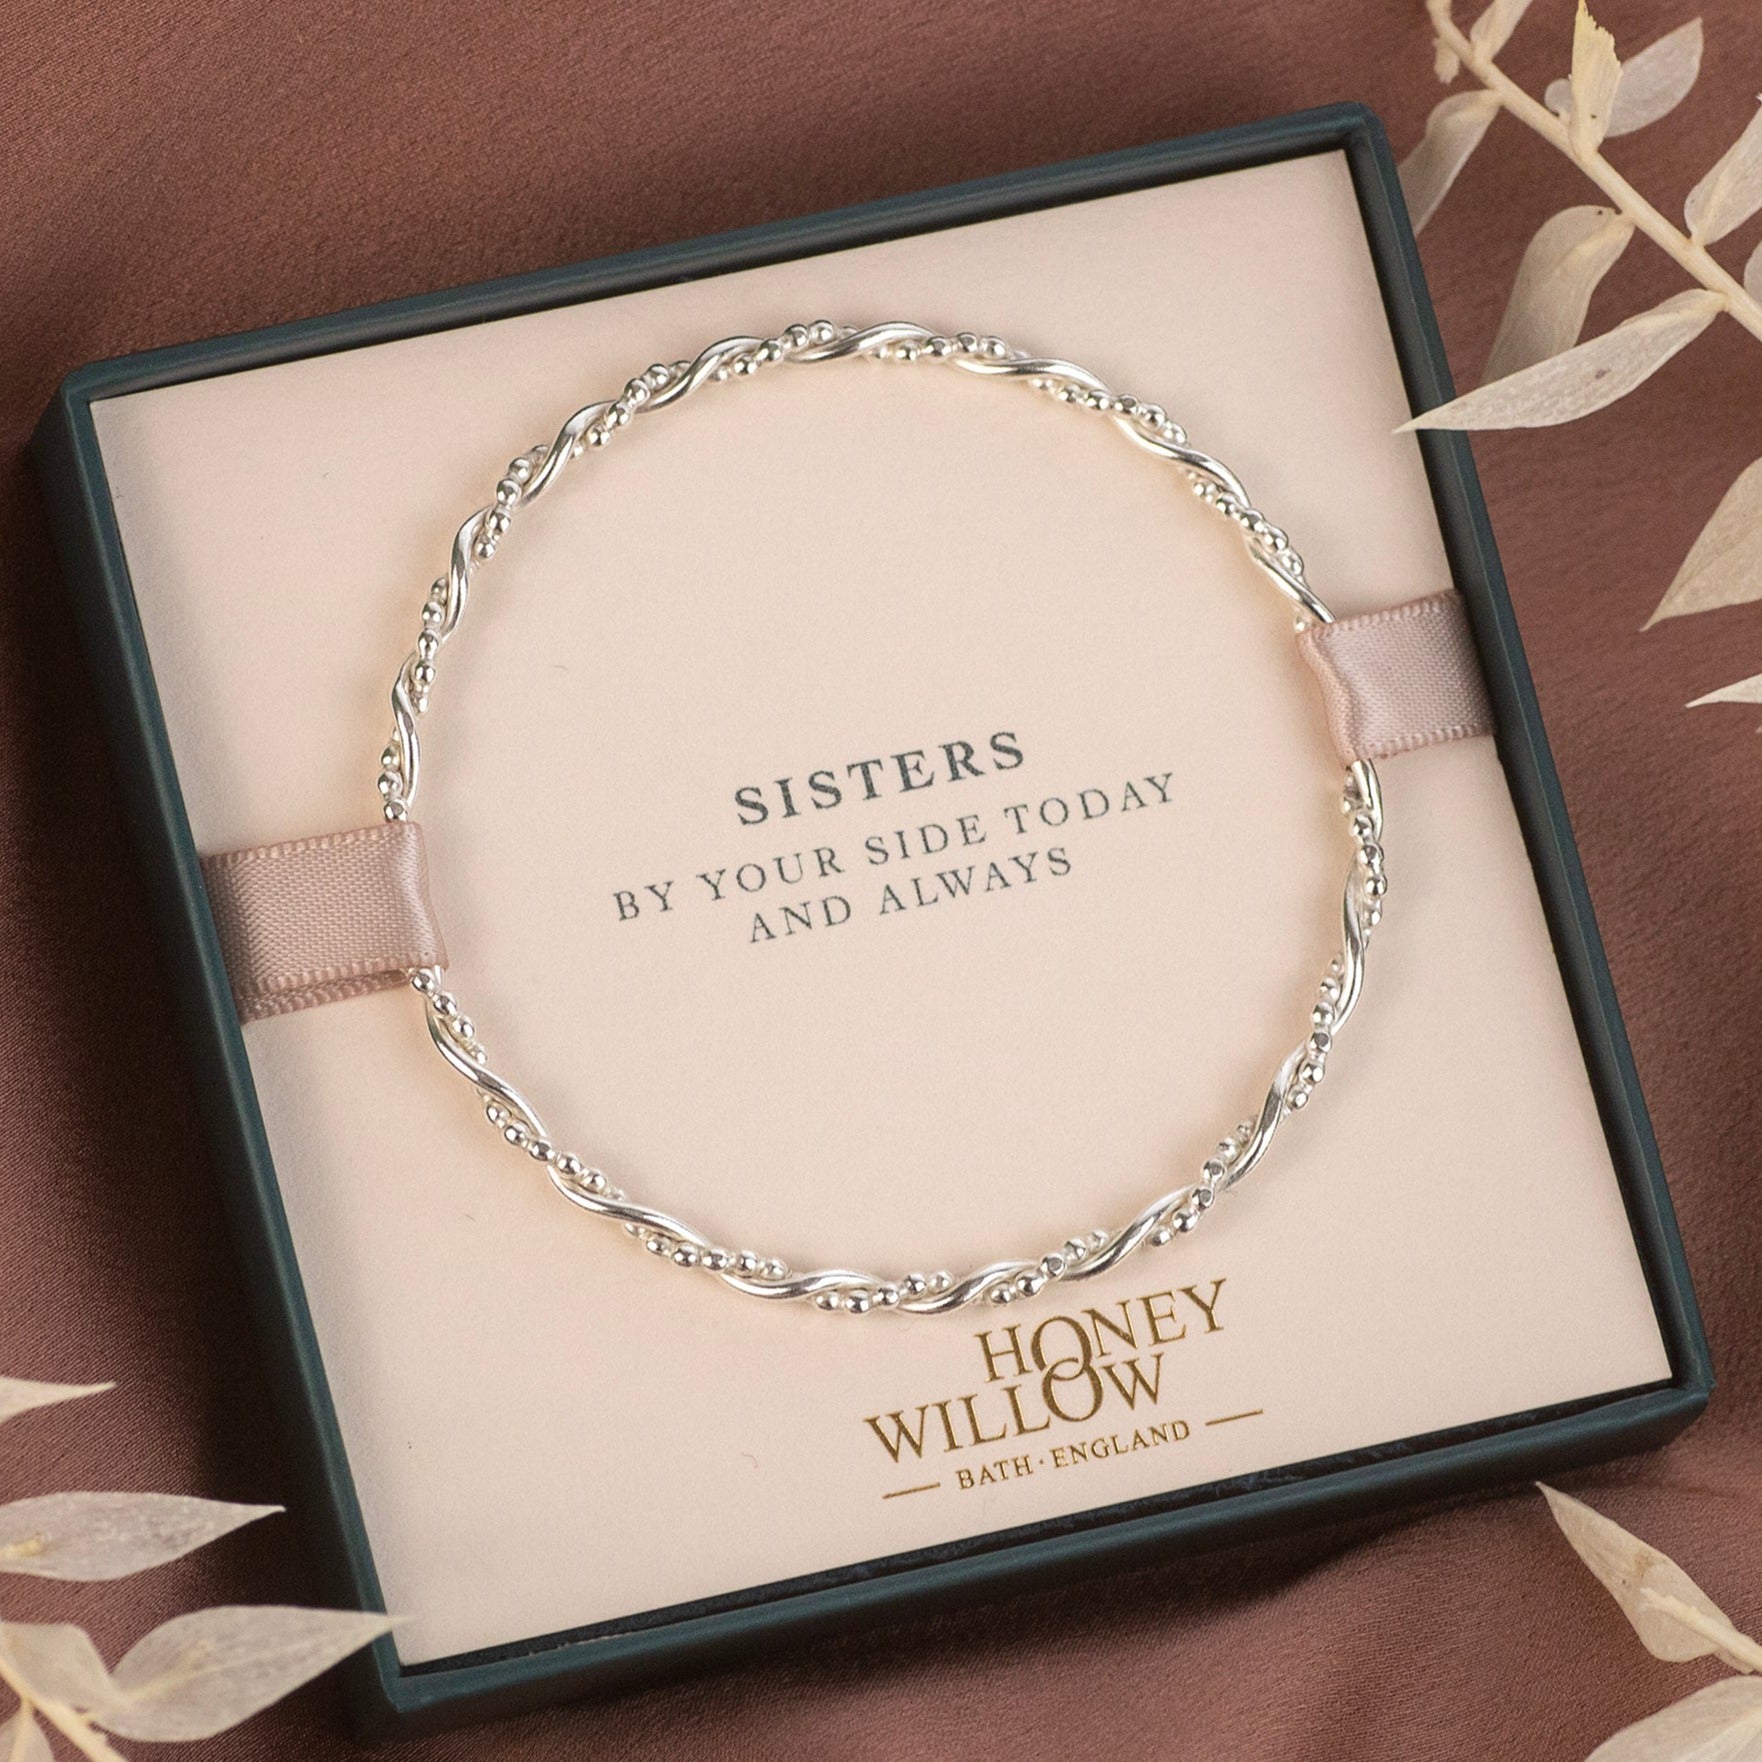 Gift for Bride from Sister - Entwined Bangle - Linked for a Lifetime